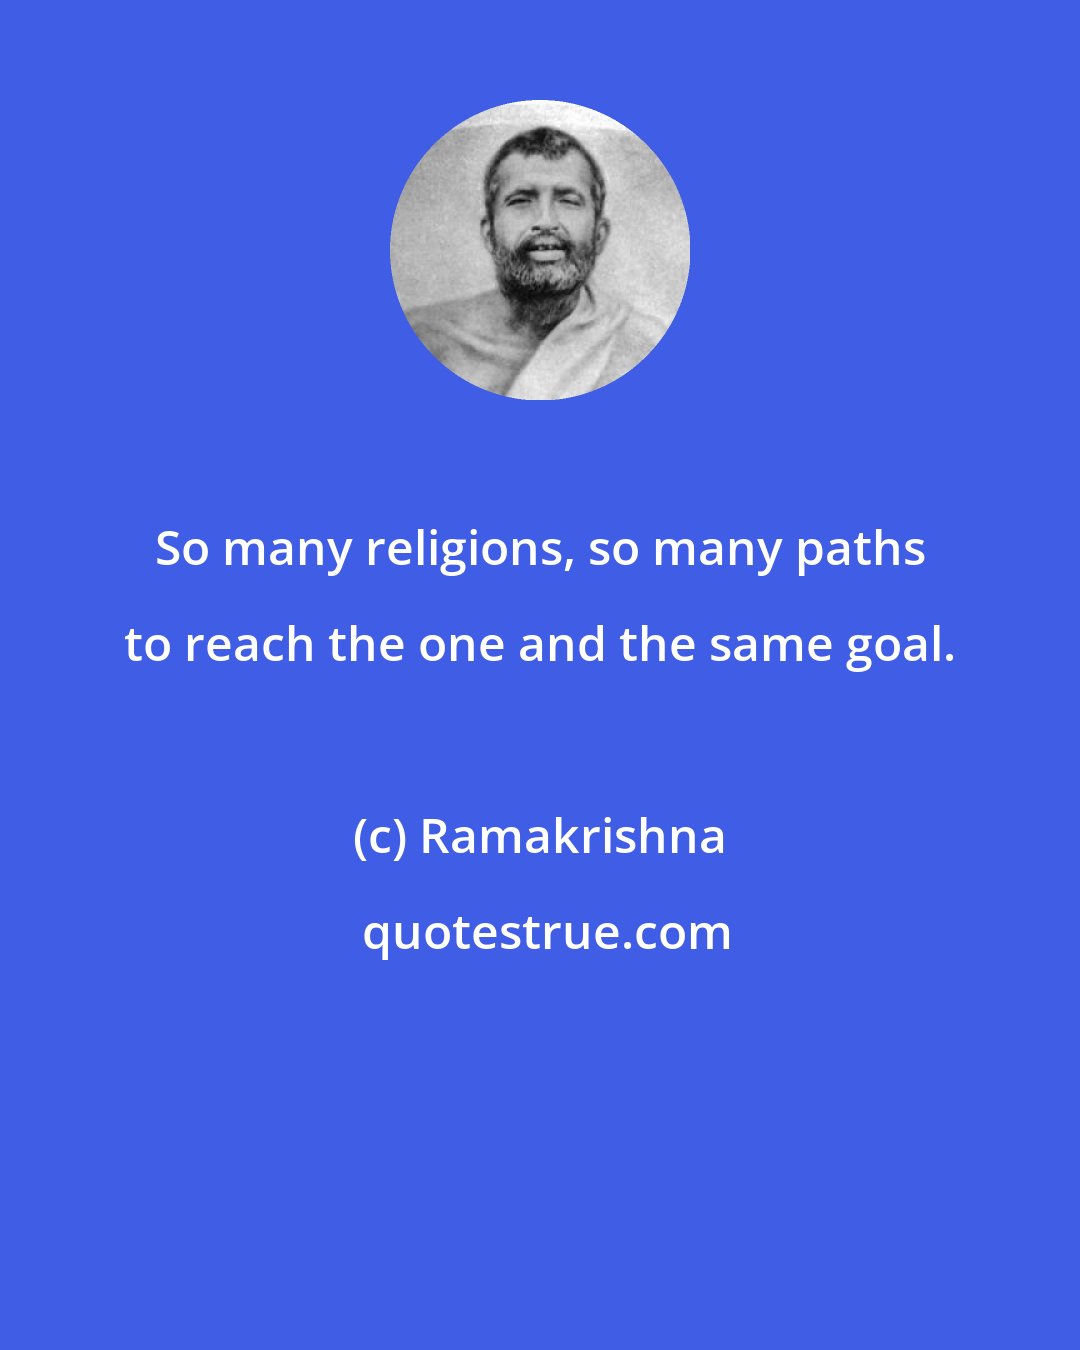 Ramakrishna: So many religions, so many paths to reach the one and the same goal.